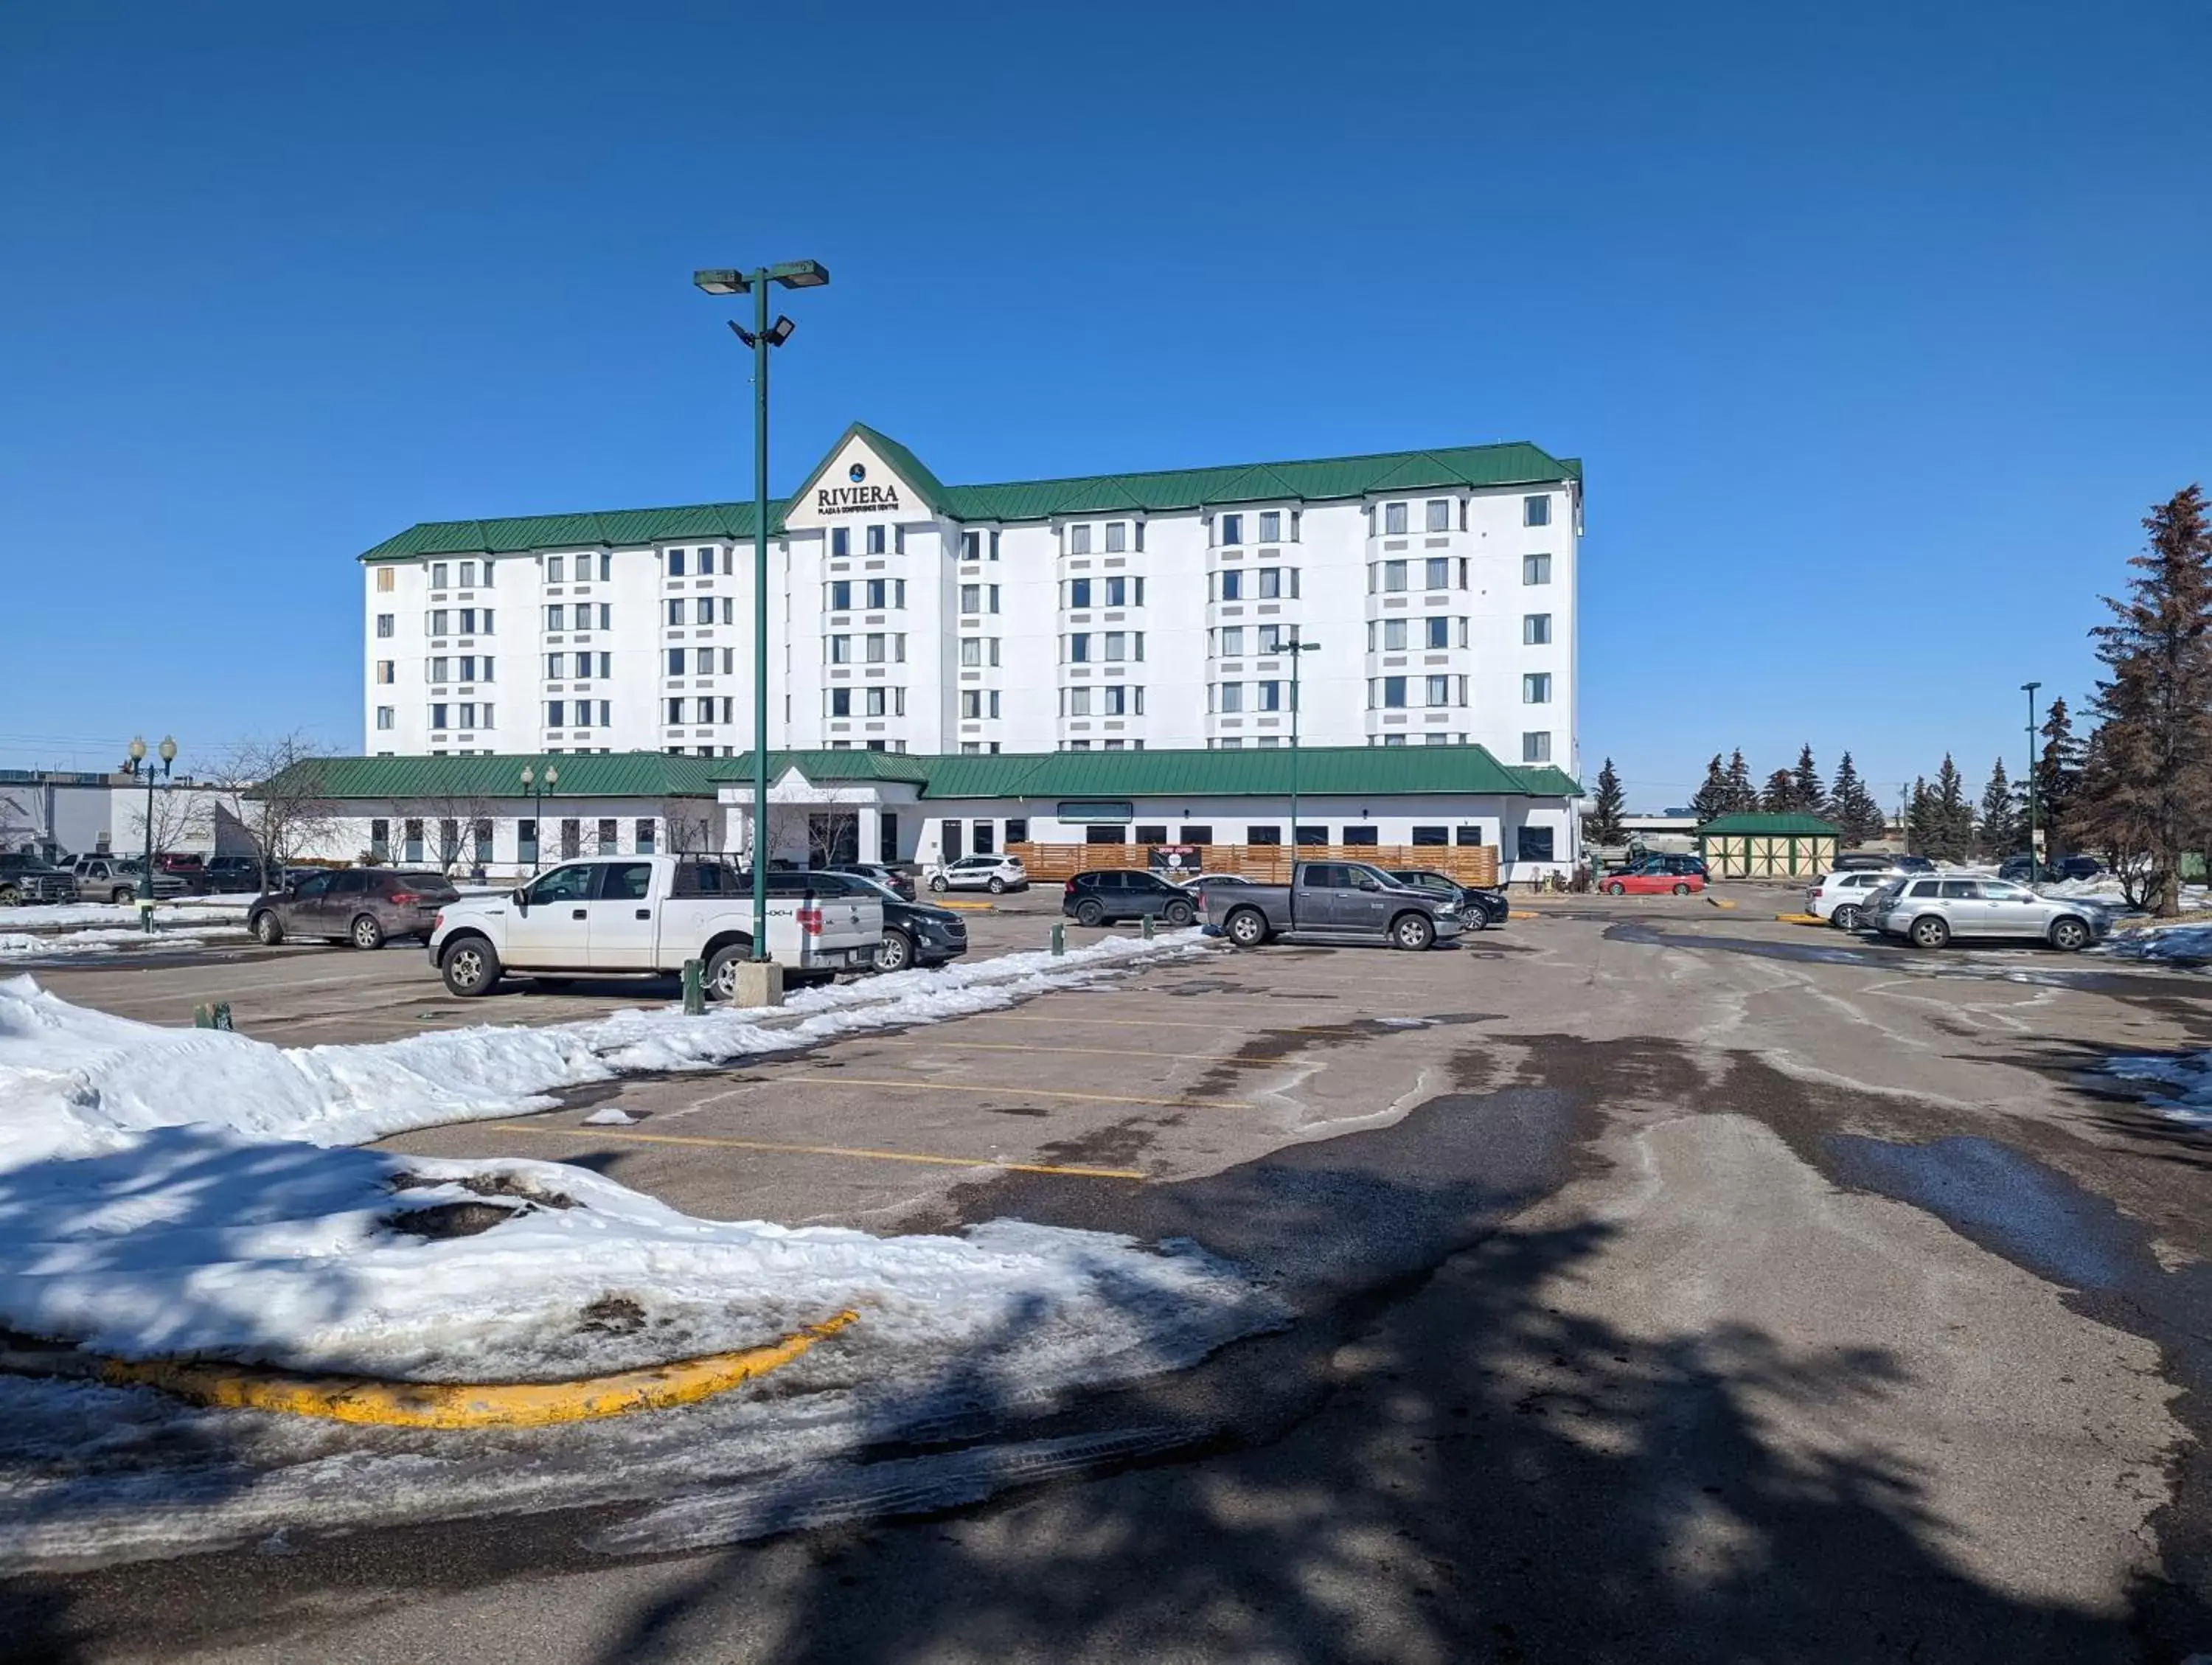 Property Building in DIVYA SUTRA Riviera Plaza and Conference Centre Calgary Airport